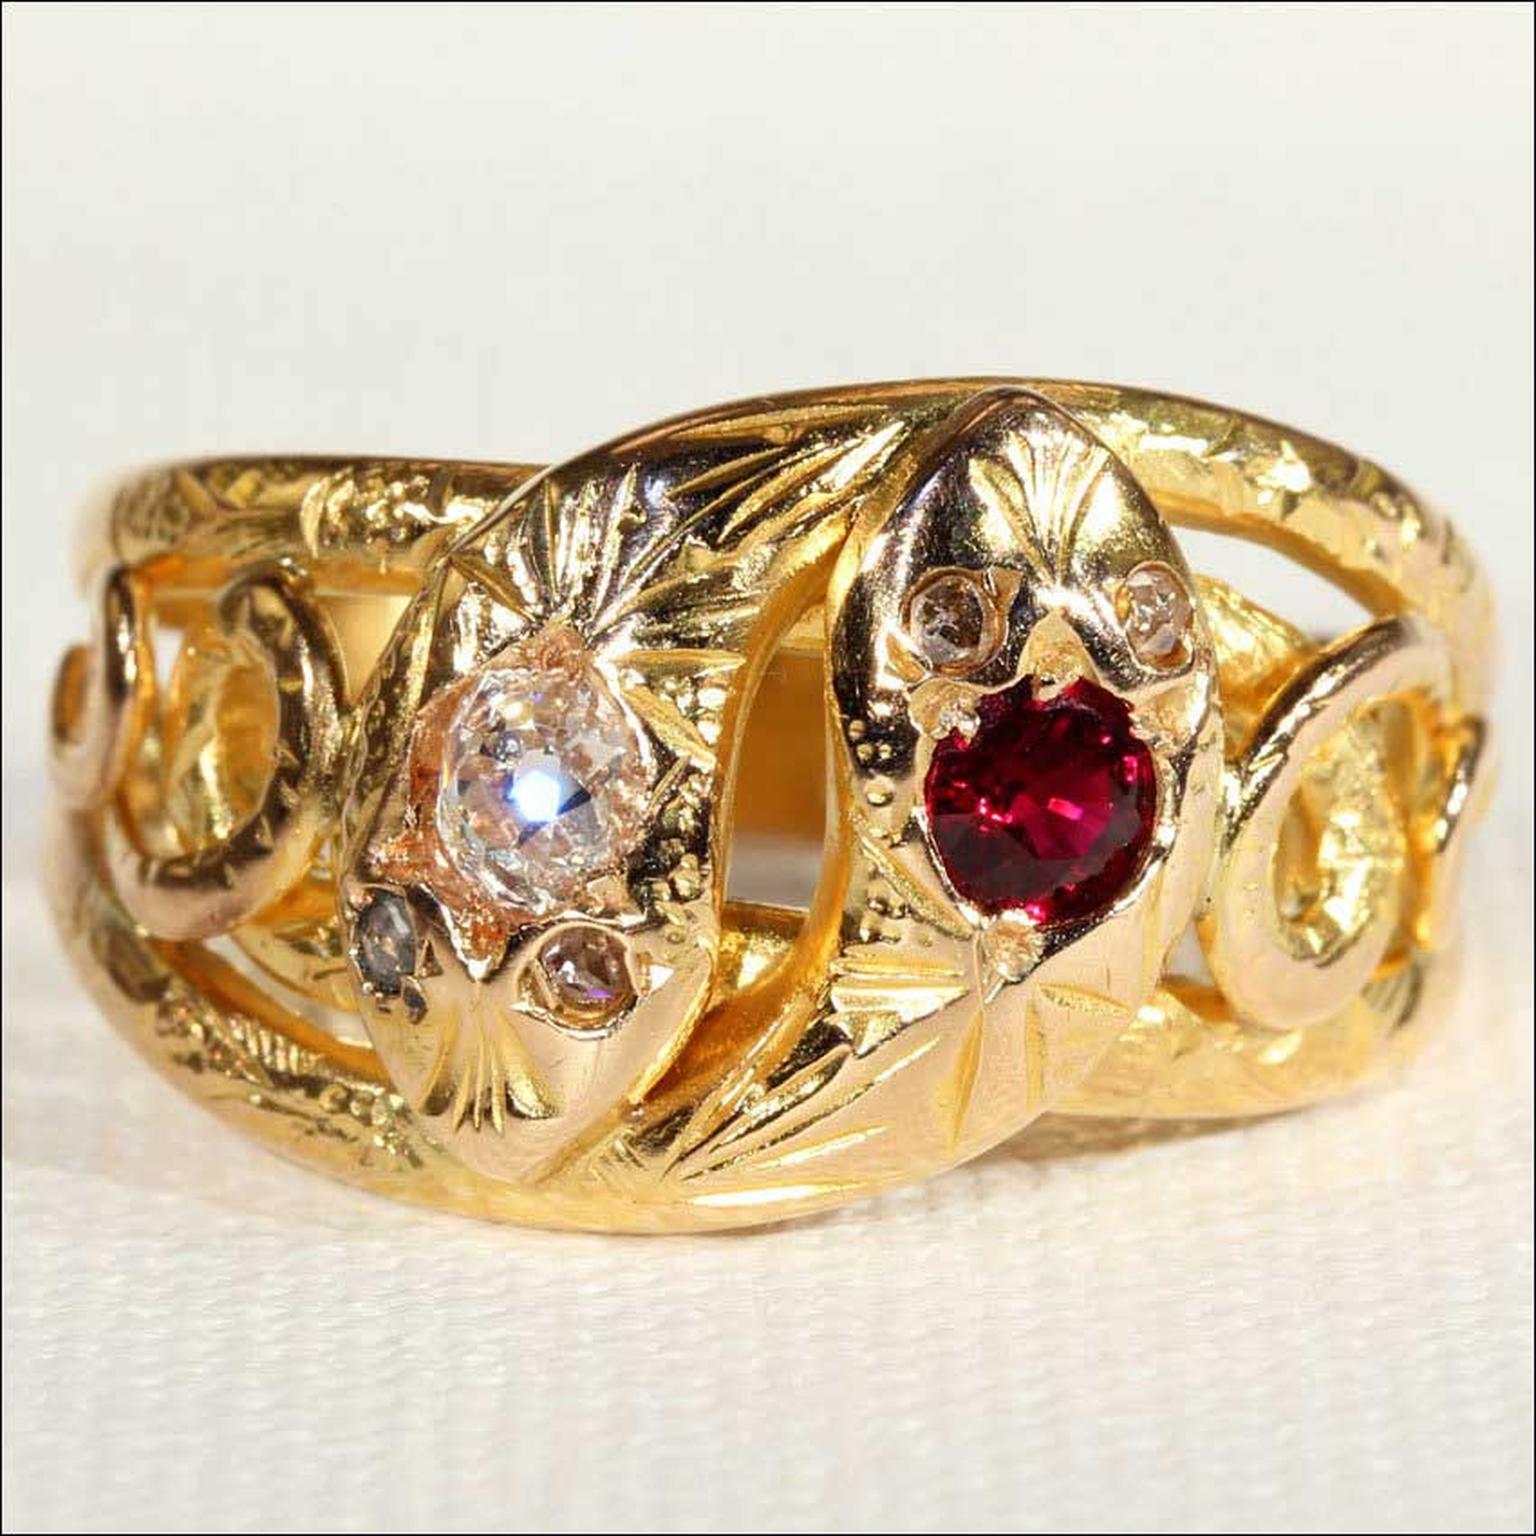 Victoria Sterling ring